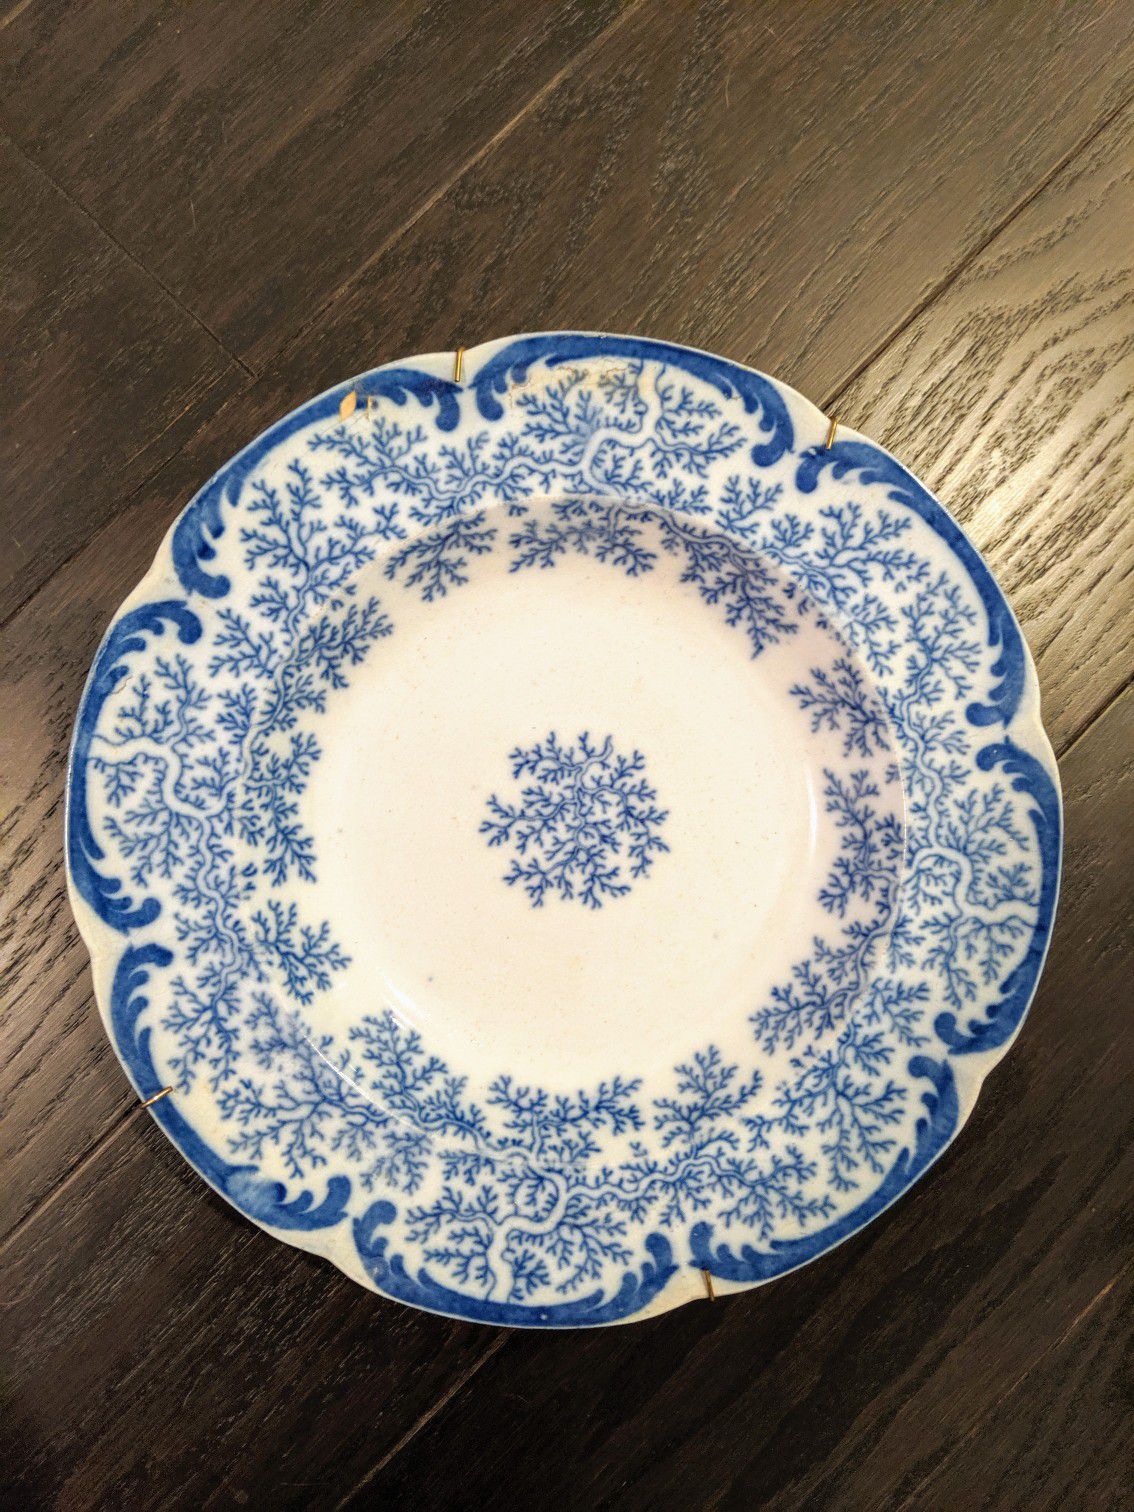 Antique China Plate